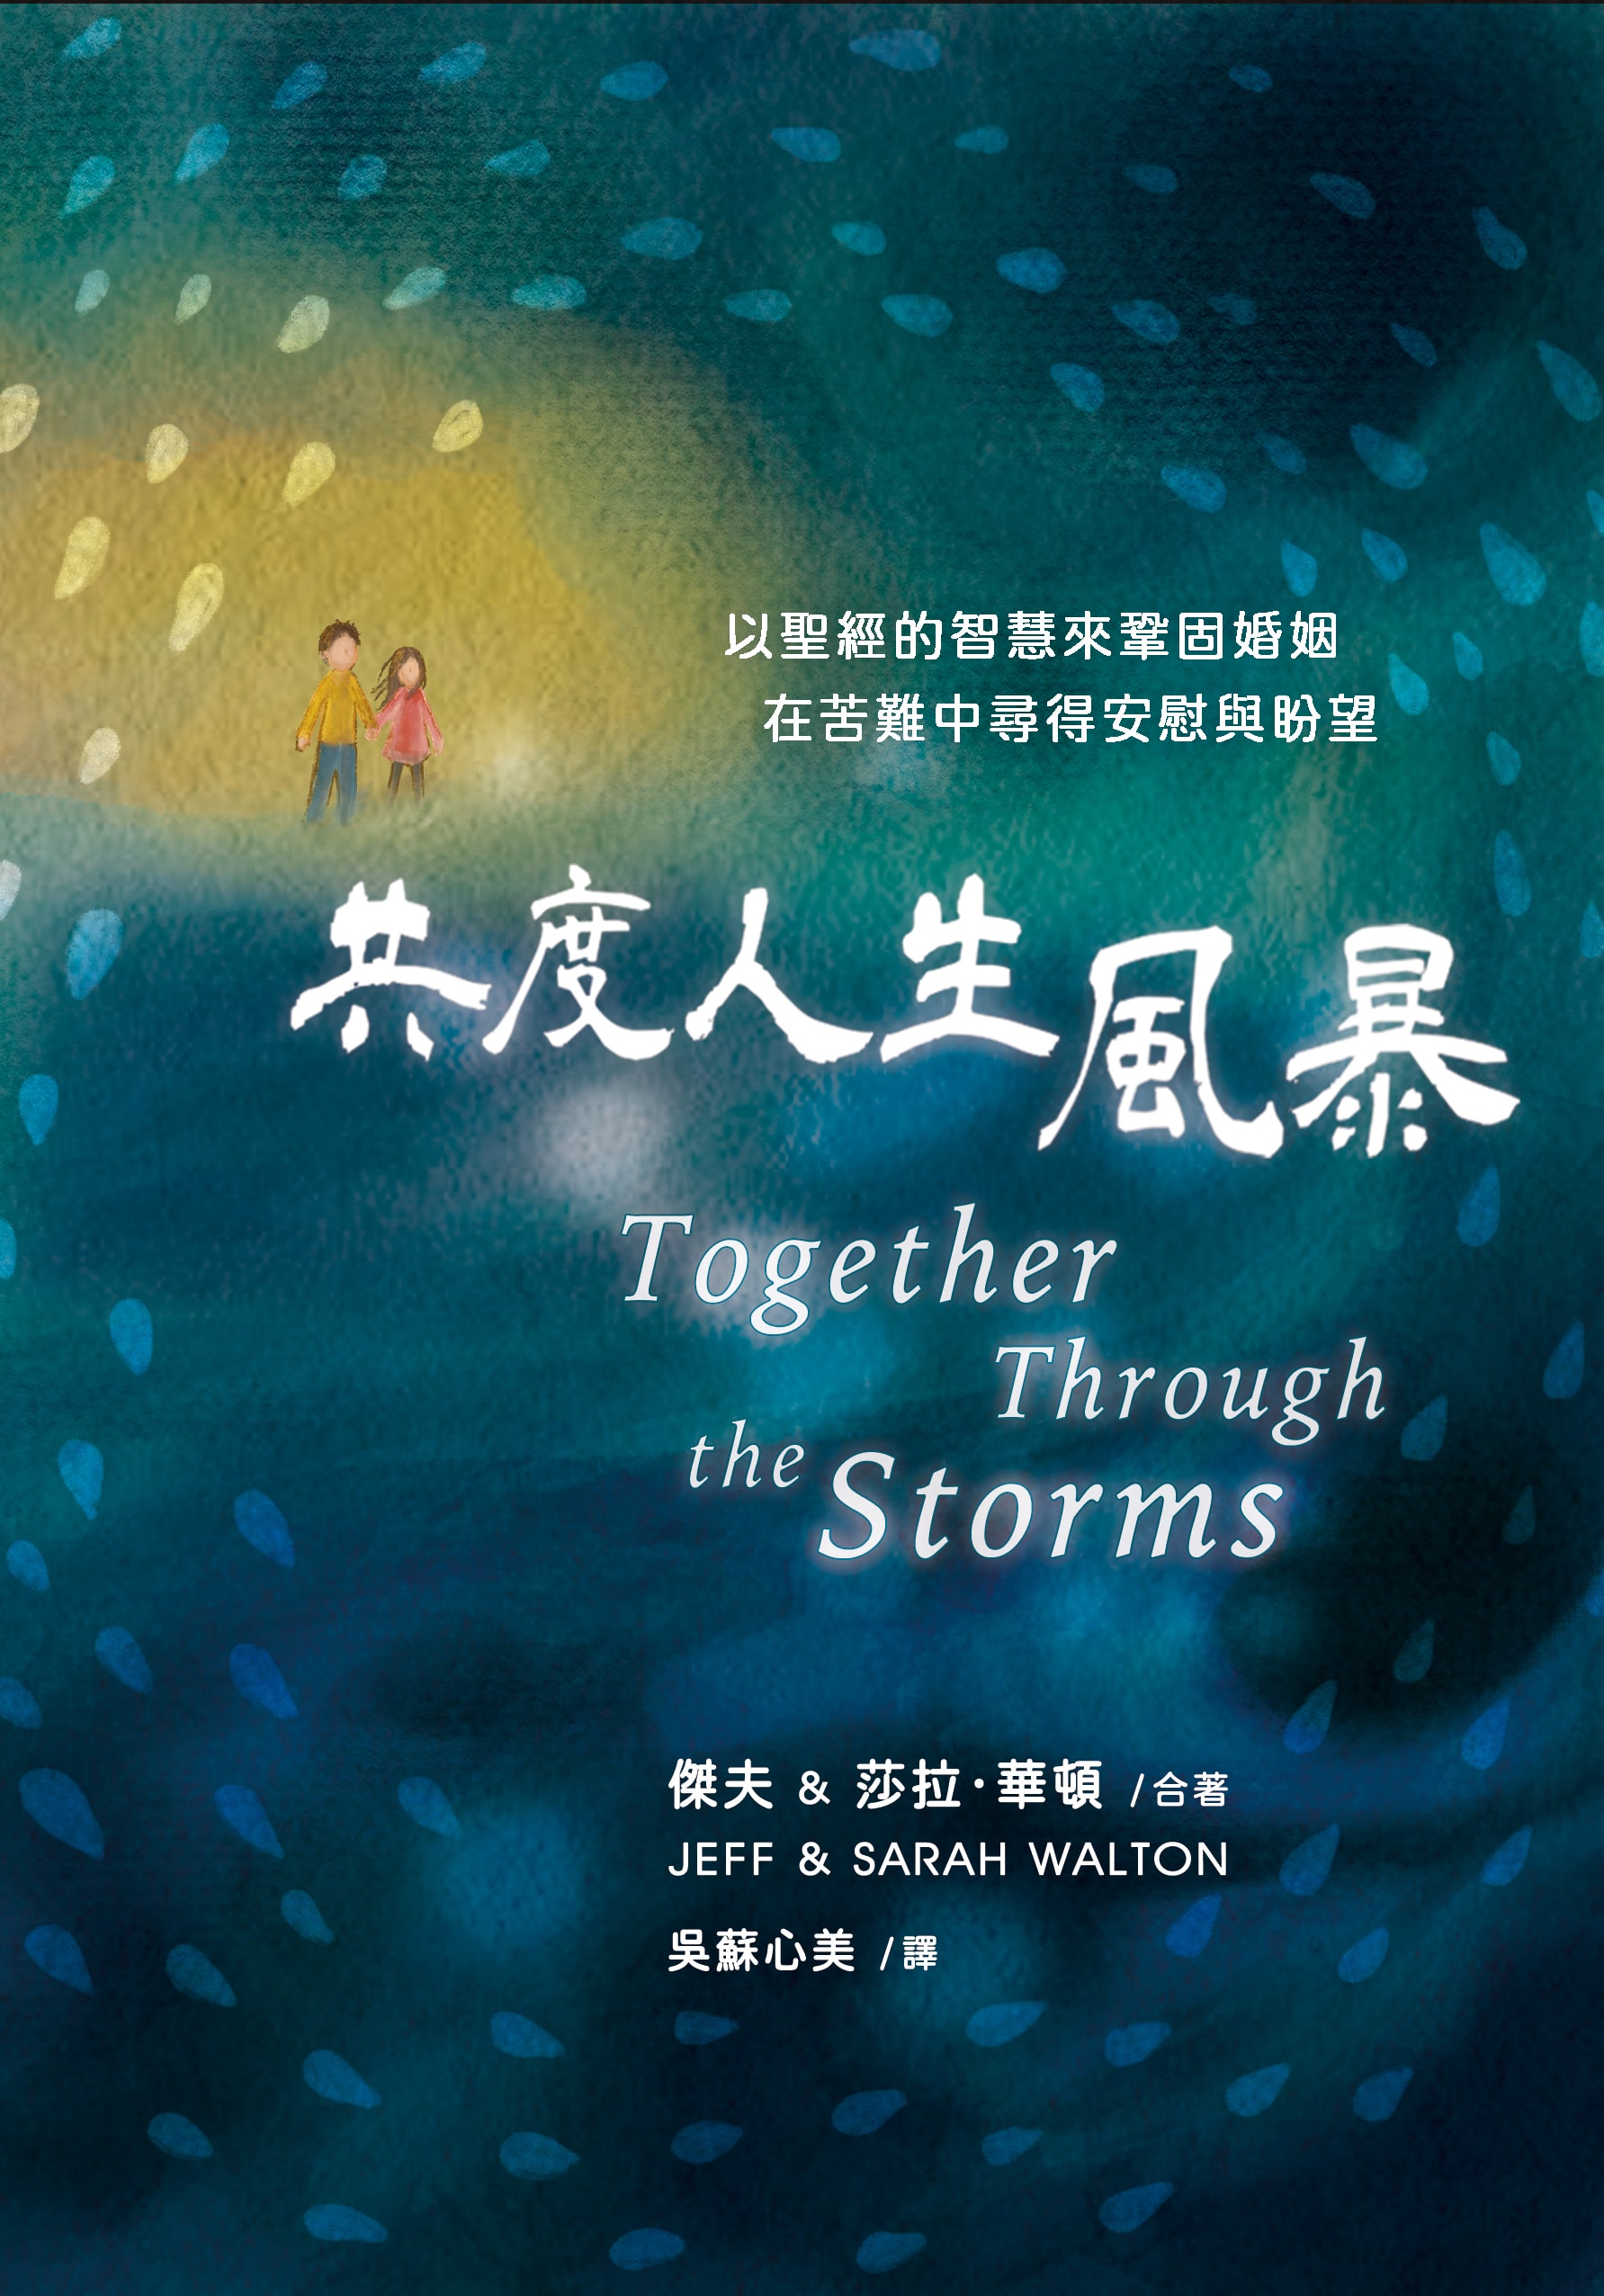 C8-01 @פHͭɡ]c骩^ Together Through the Storms